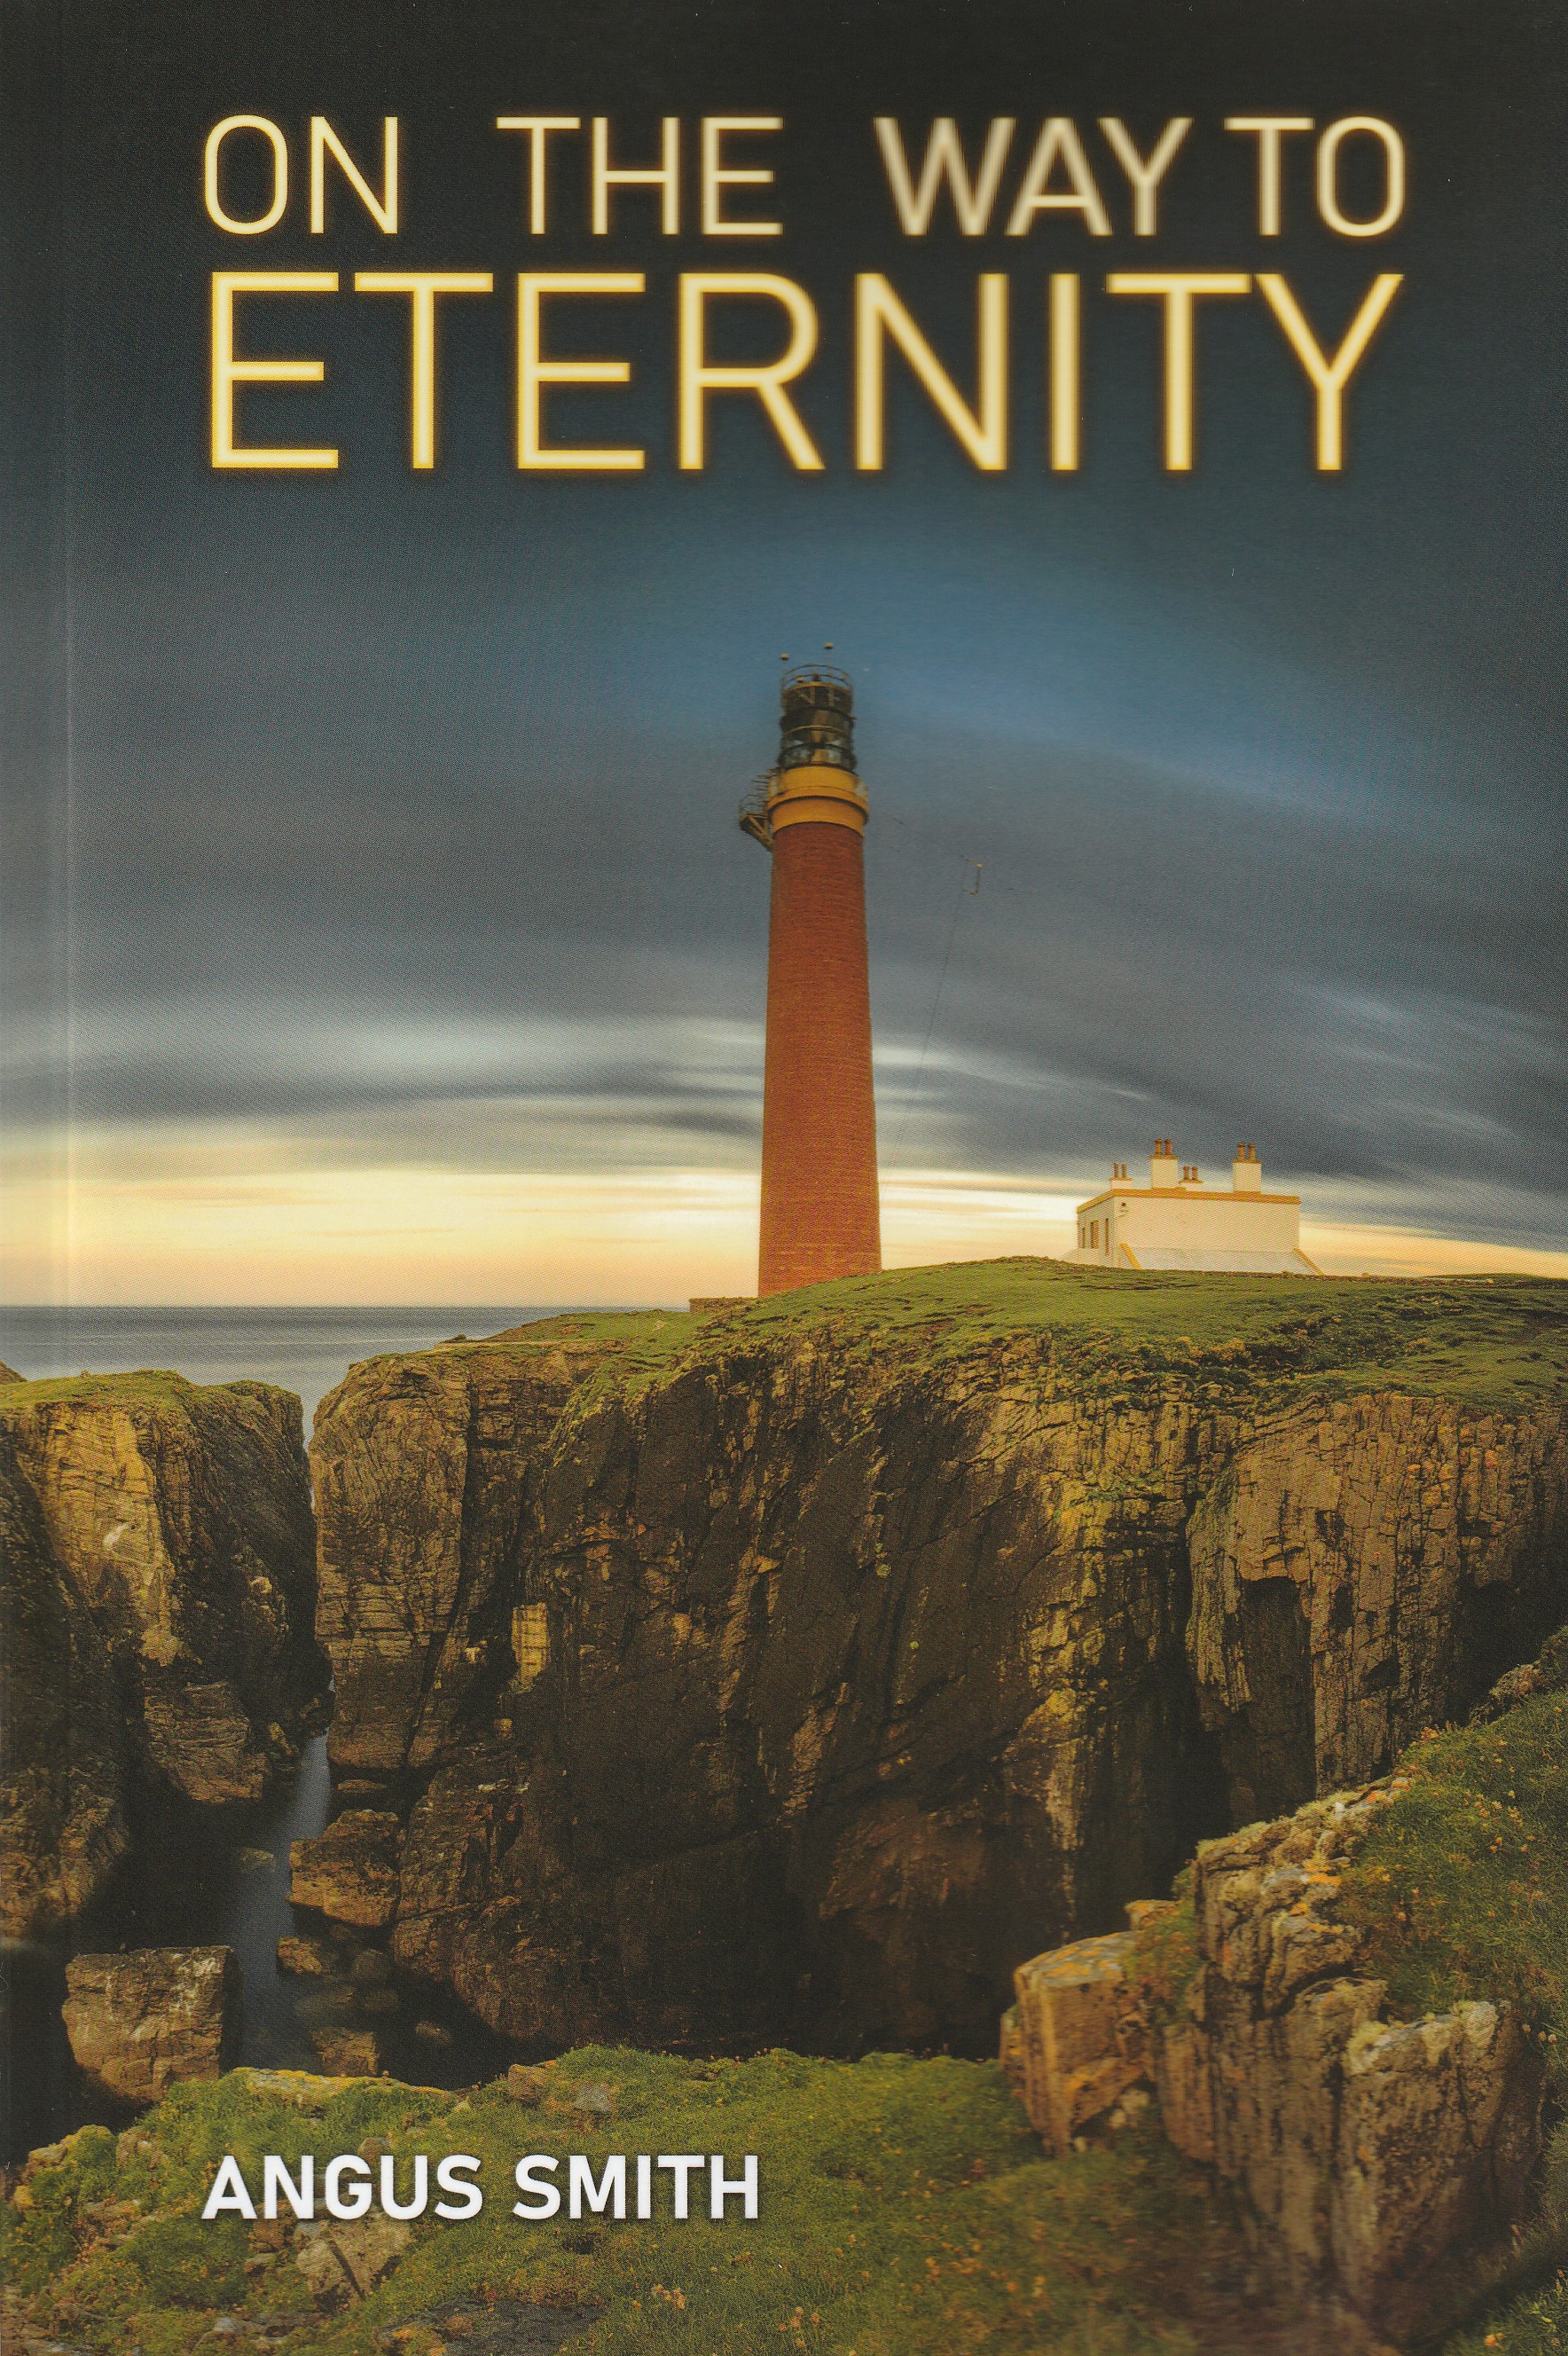 On the Way to Eternity (paperback)